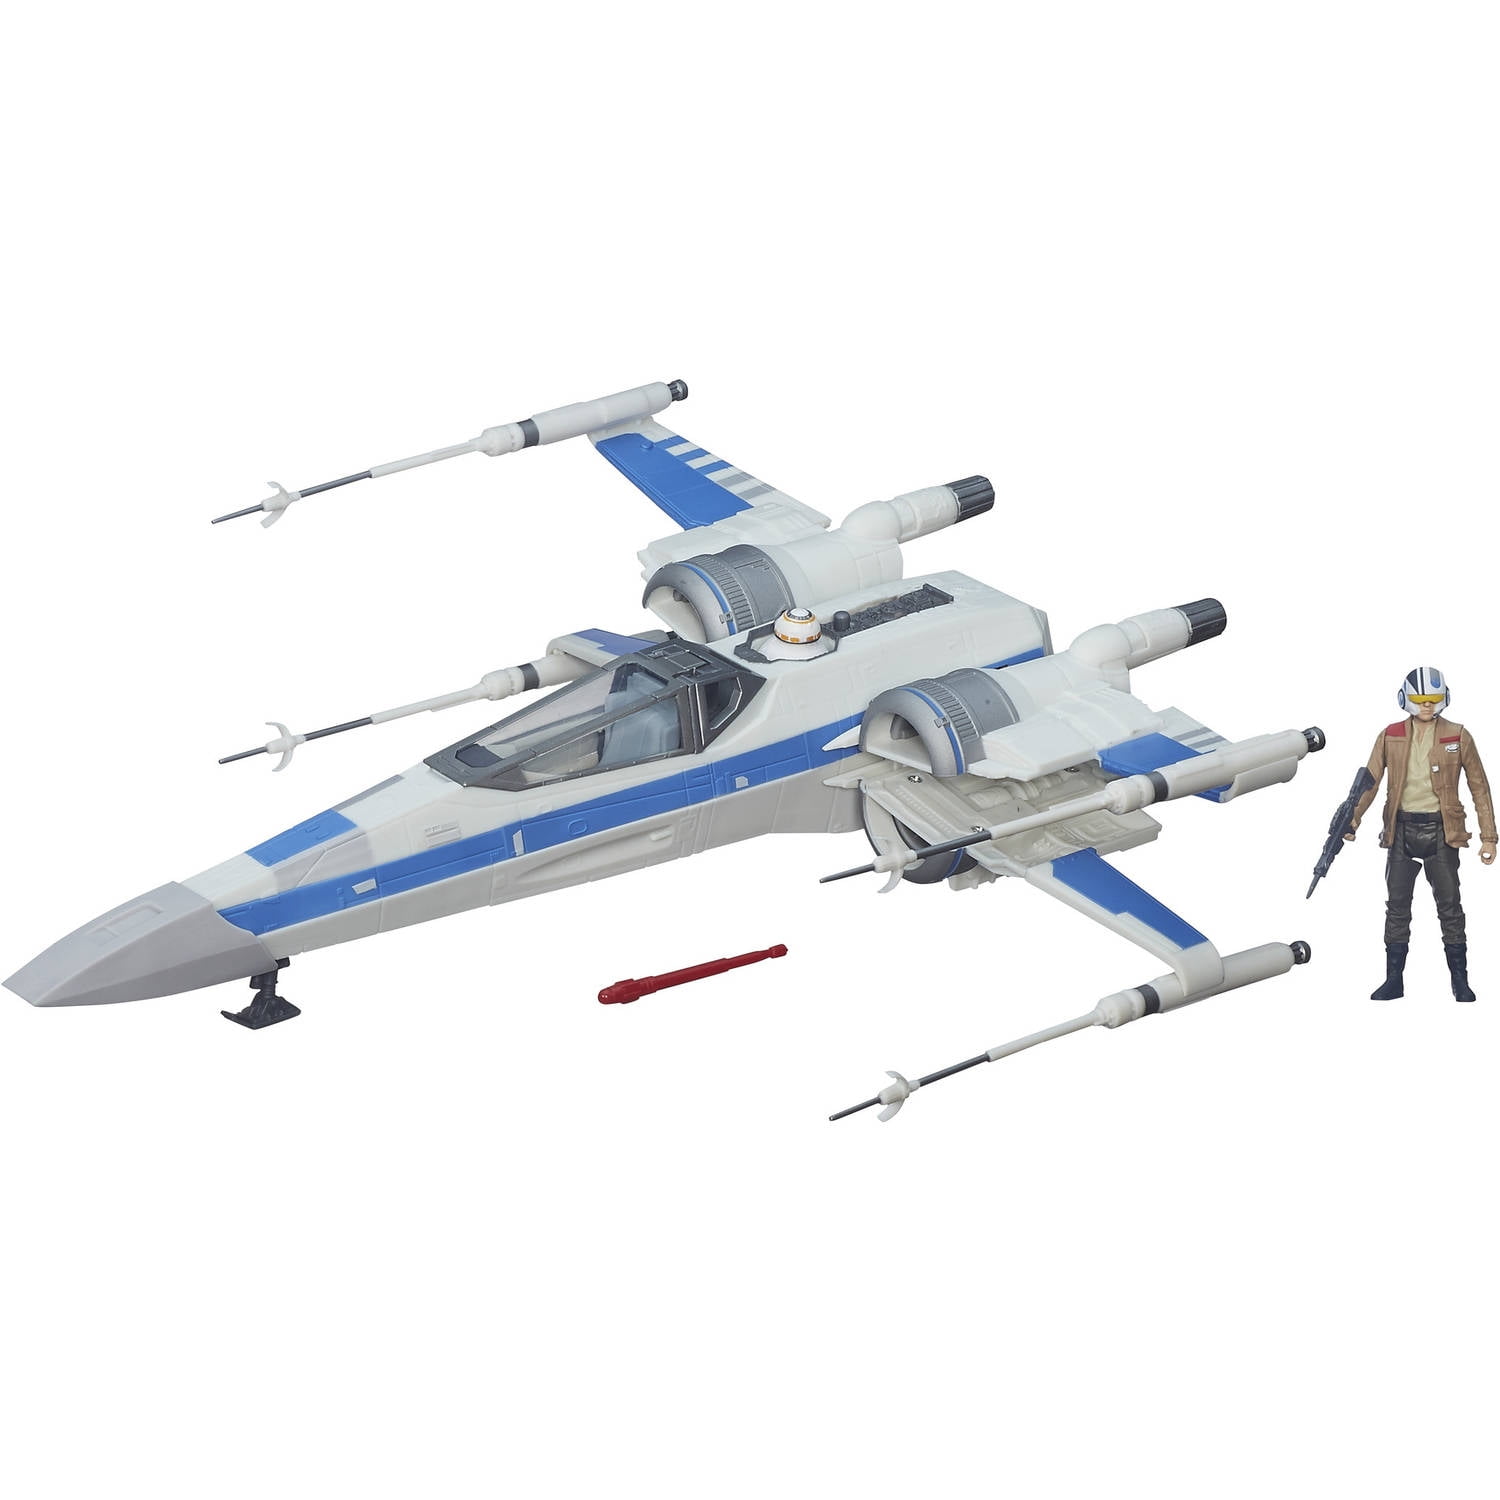 2016 Star Wars The Force Awakens Chrome Ships and Vehicles #7 Poe's X-wing 